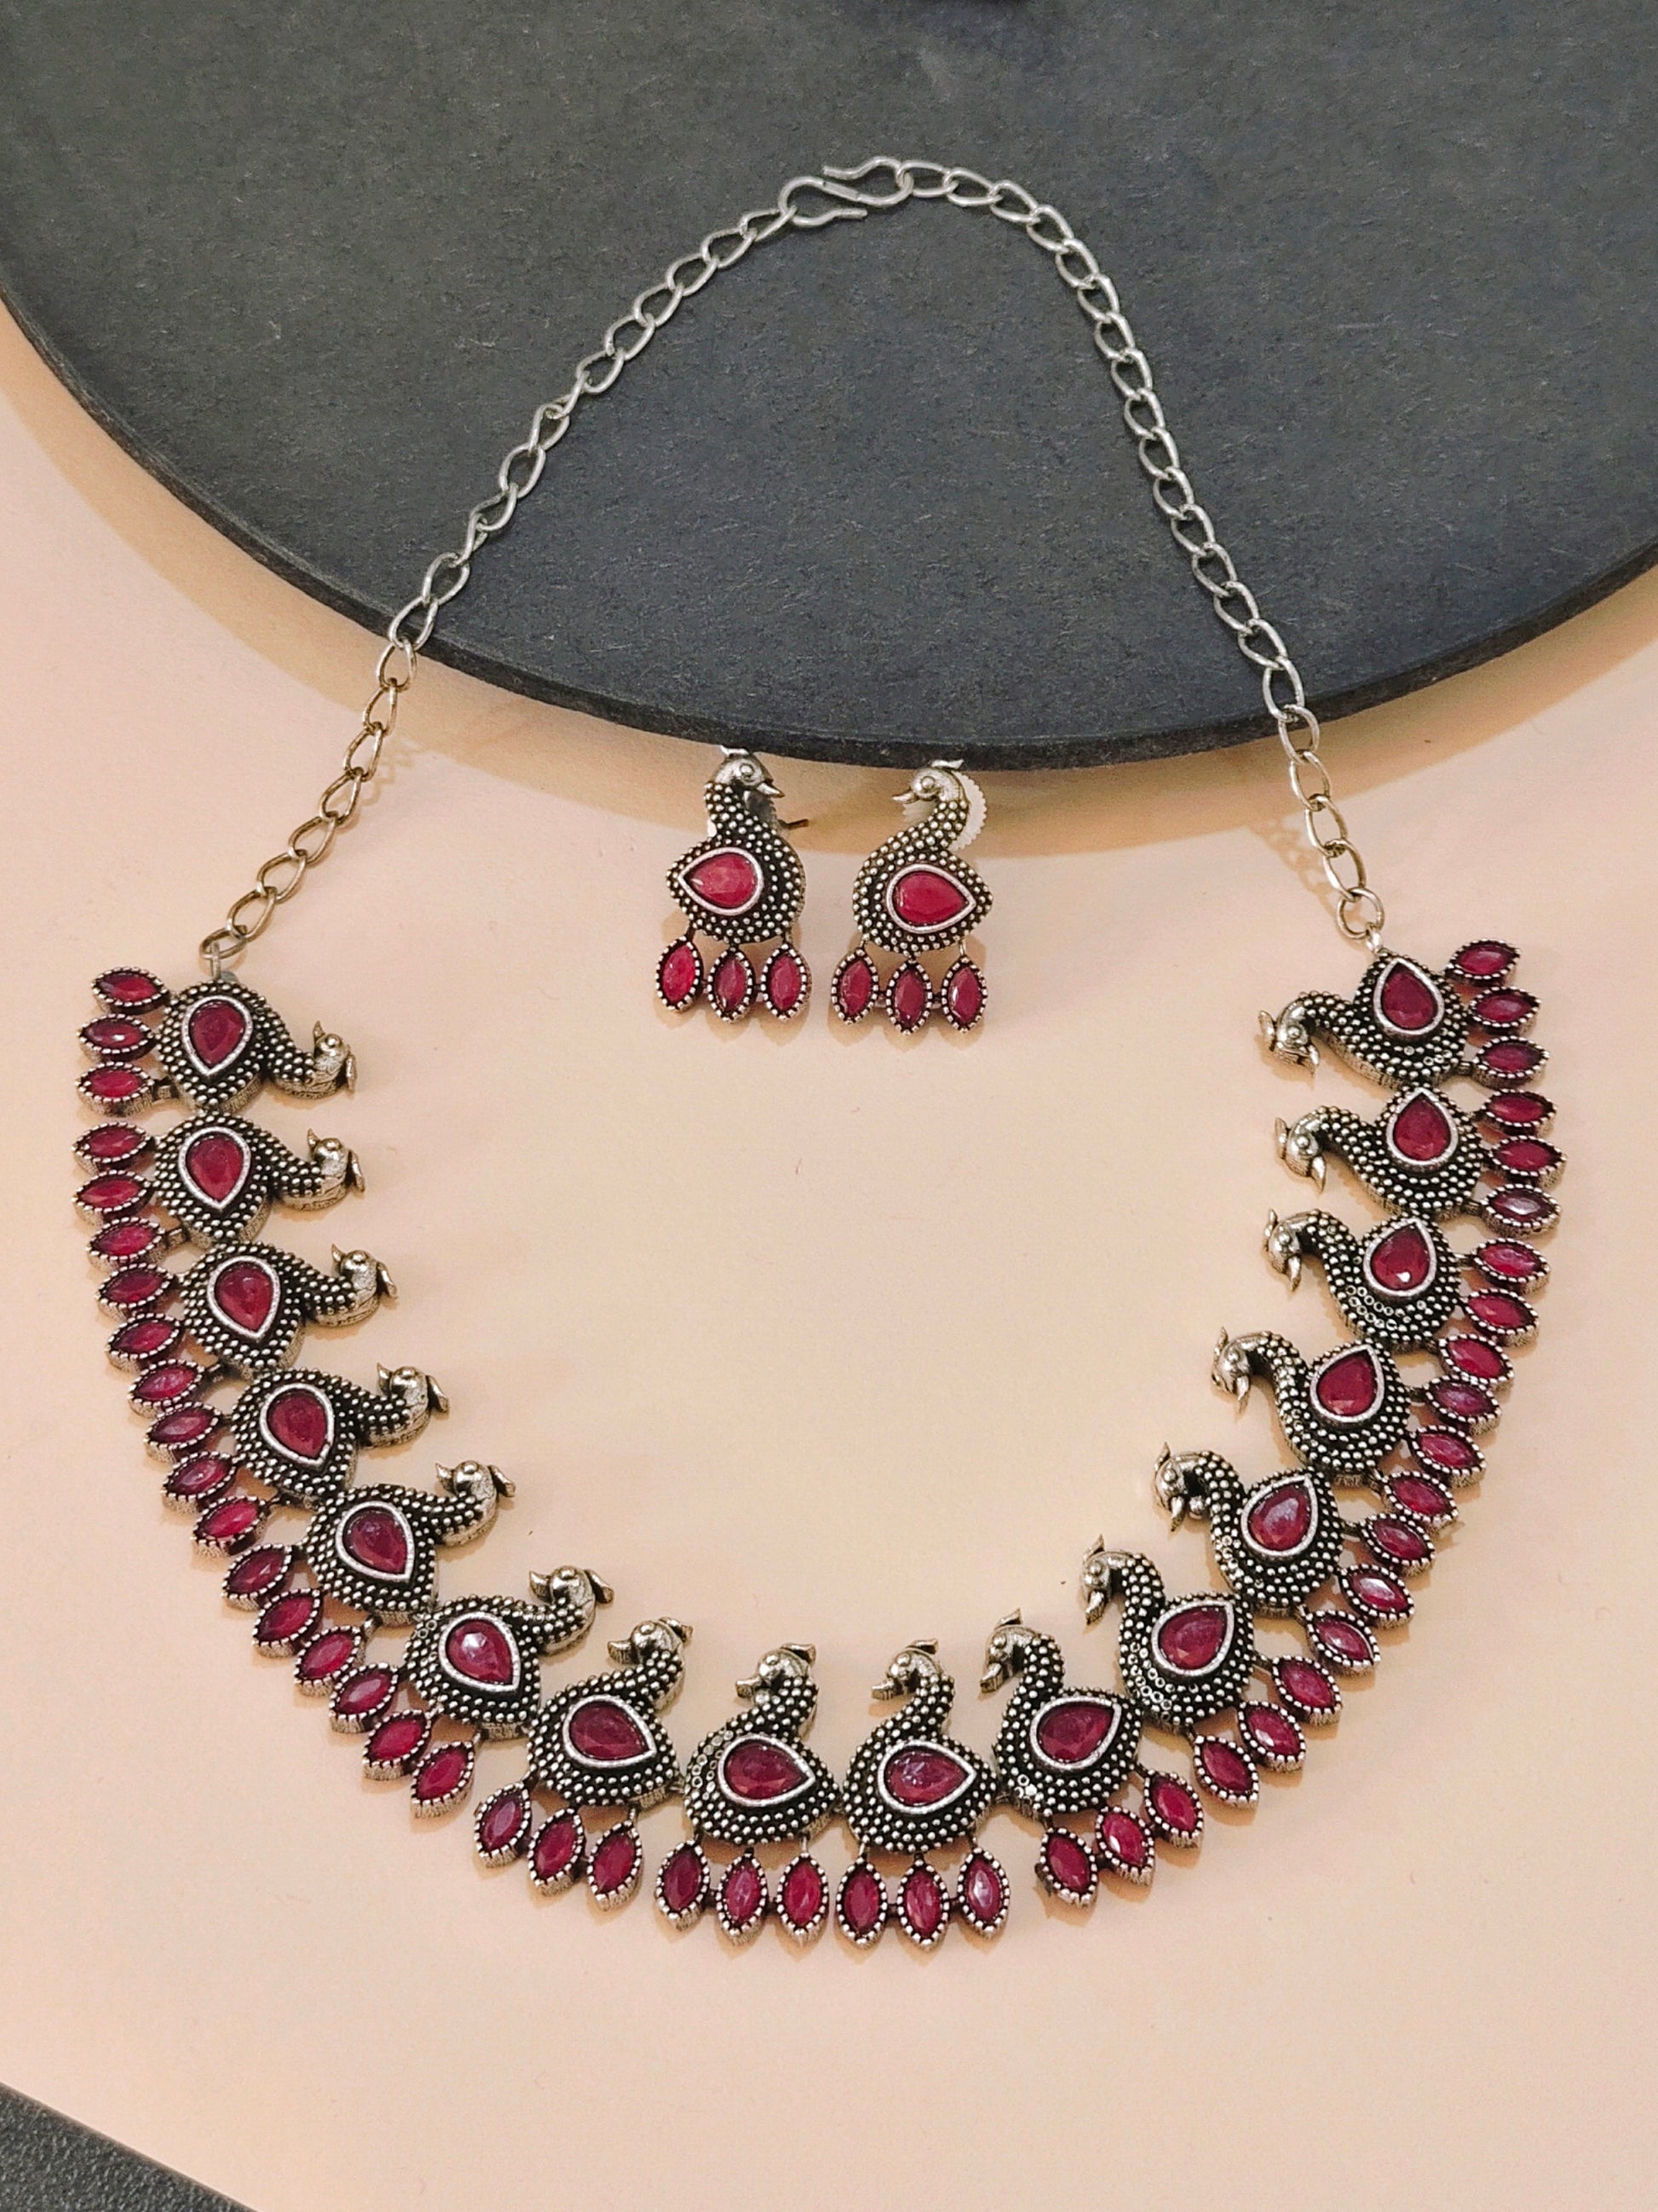 Sarang Necklace Set from House of Mrigaya by Nandini for Traditional and Festive Occasions | Gifting | Wedding & Festive - Maroon - Mrigaya India